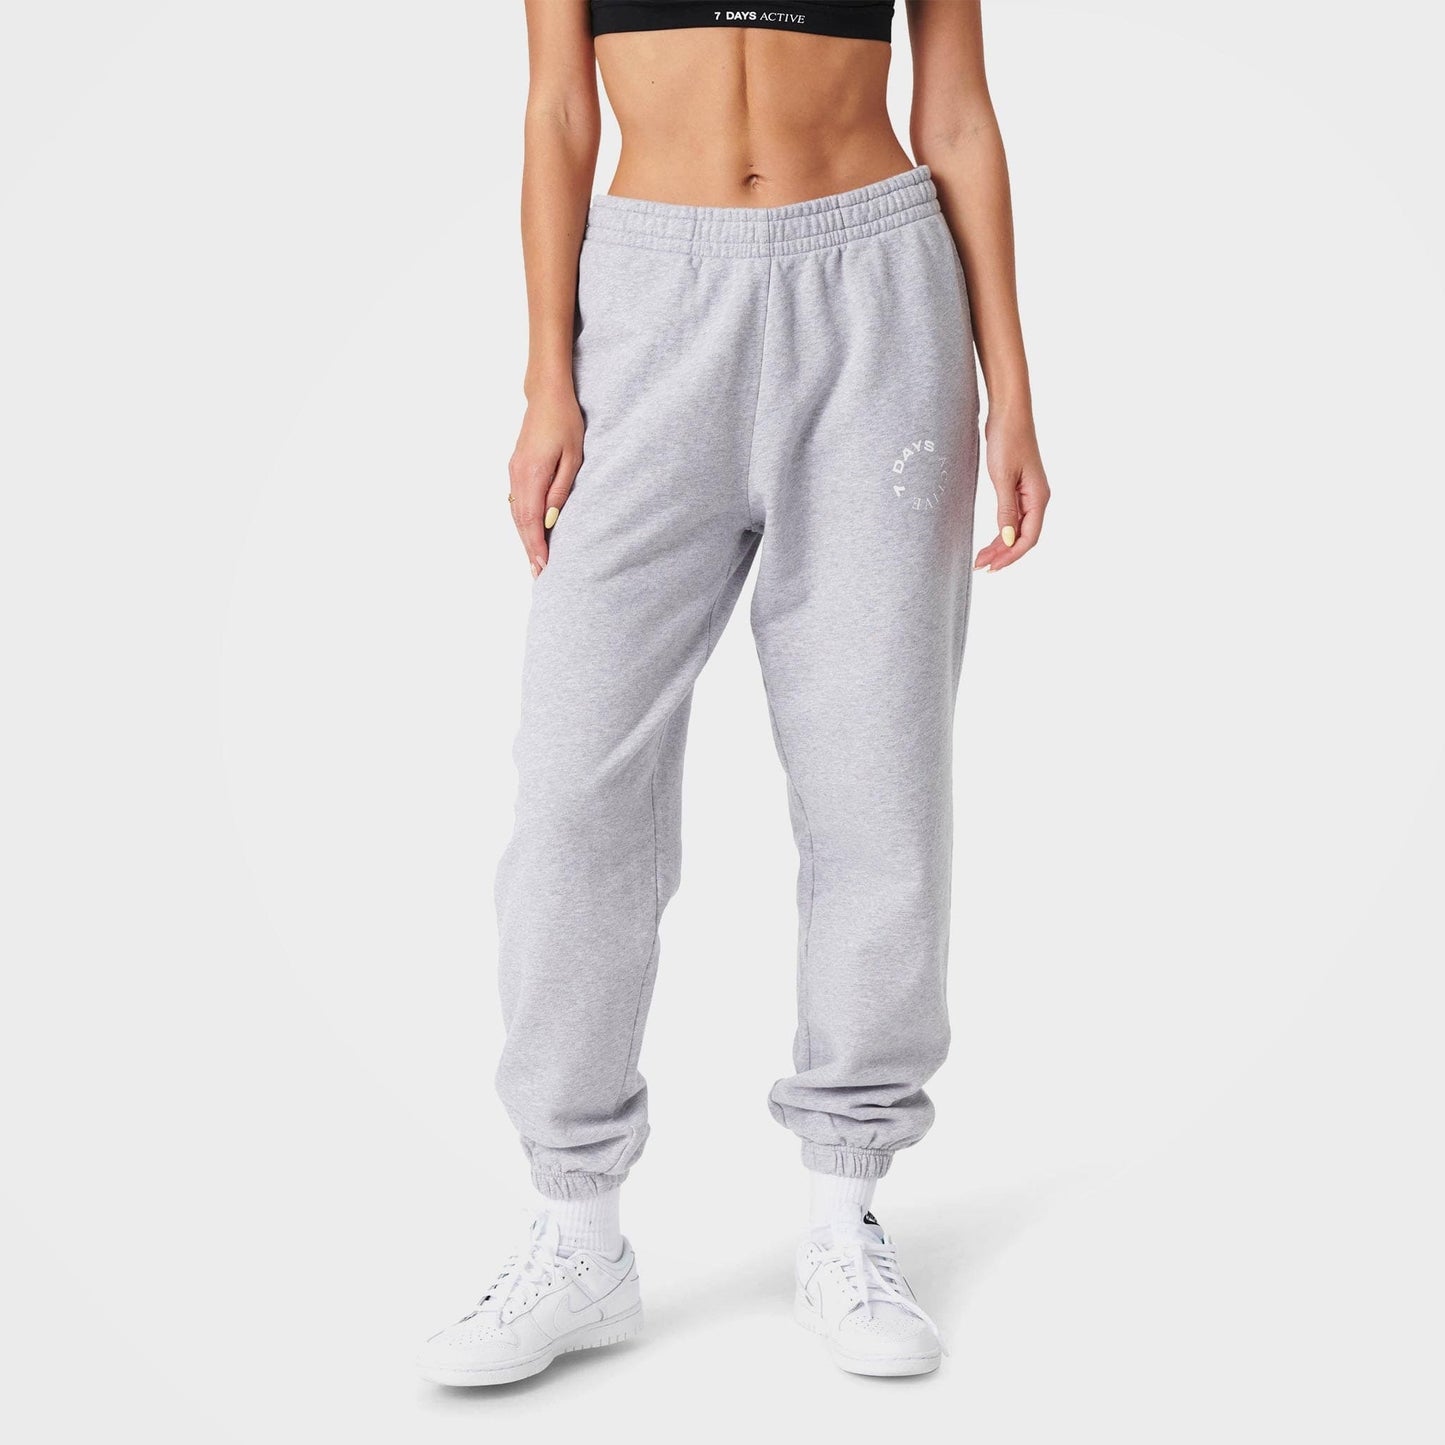 Heather Grey Organic Cotton Sweatpants by 7Days Active